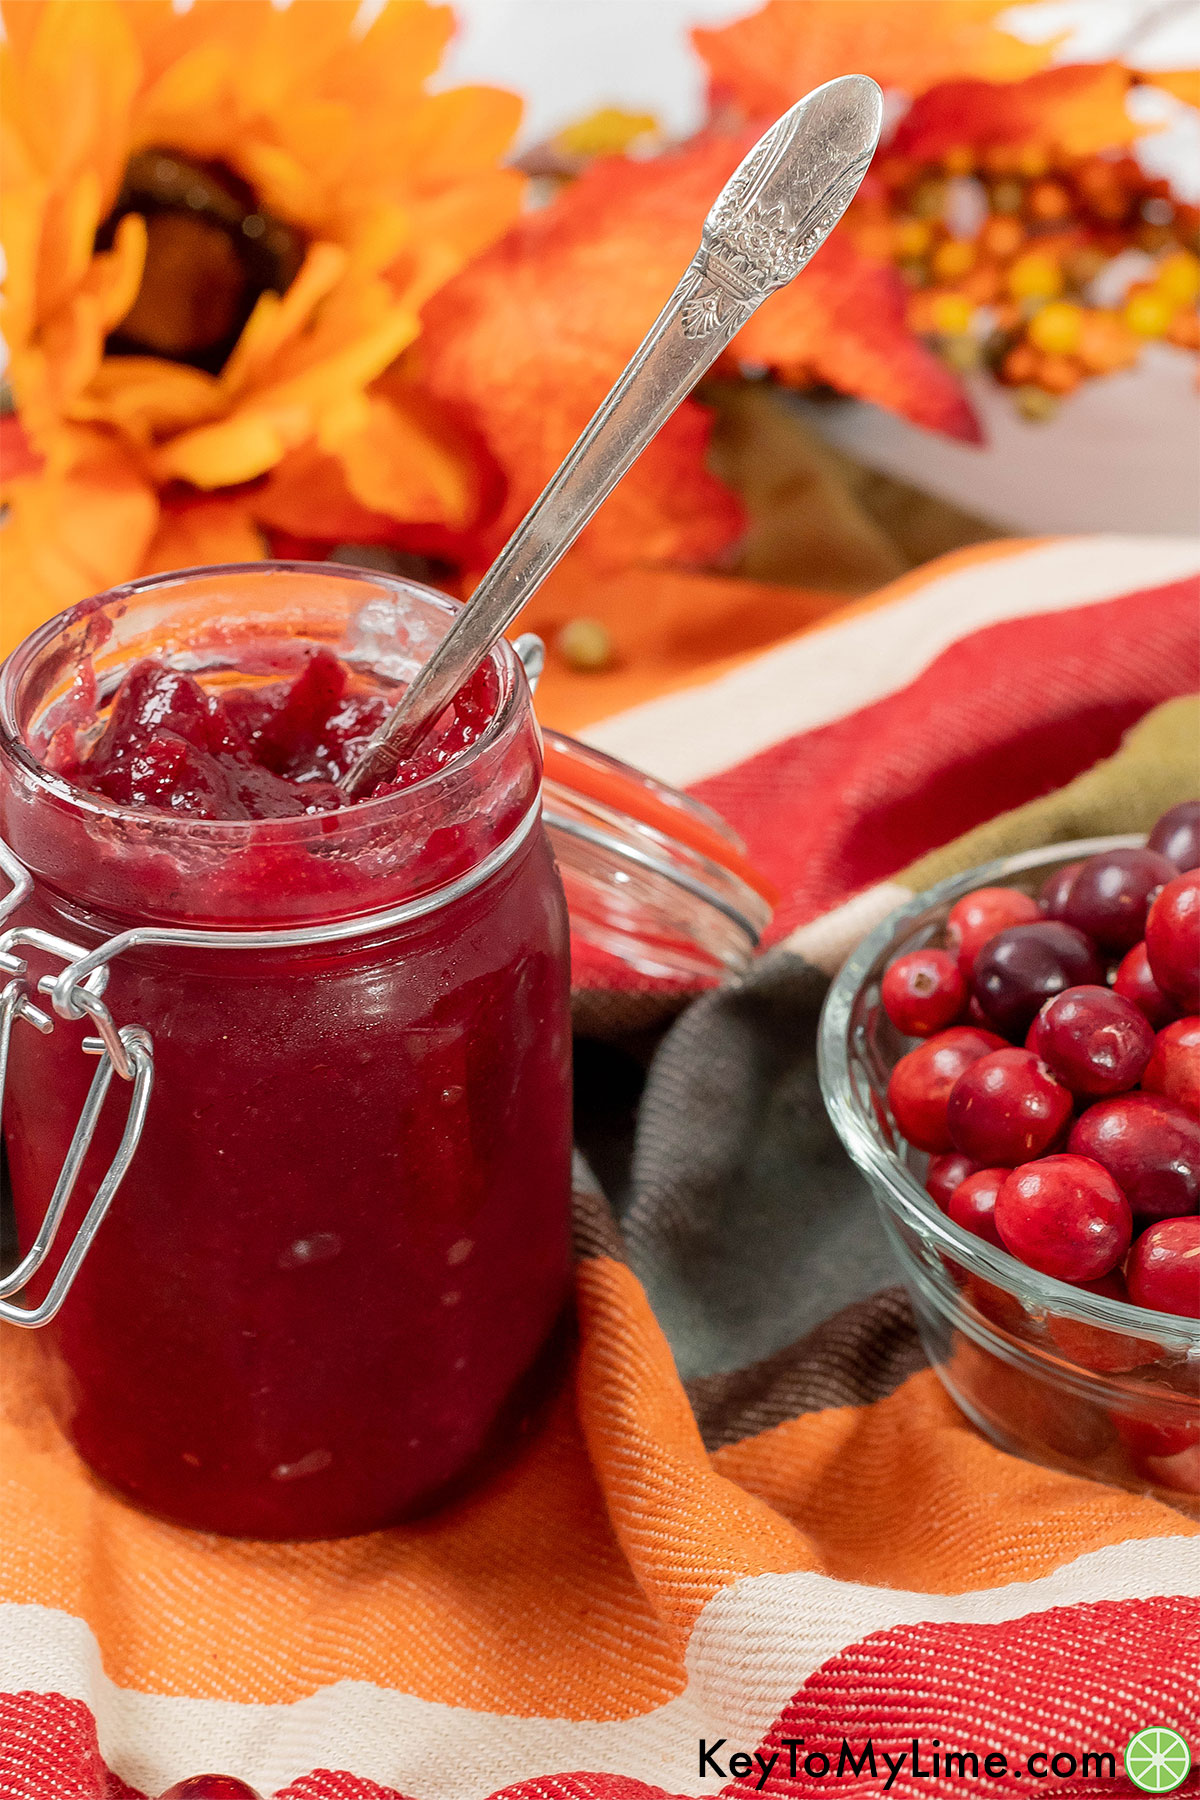 An image of a serving spoon inside a jar of cranberry jam.